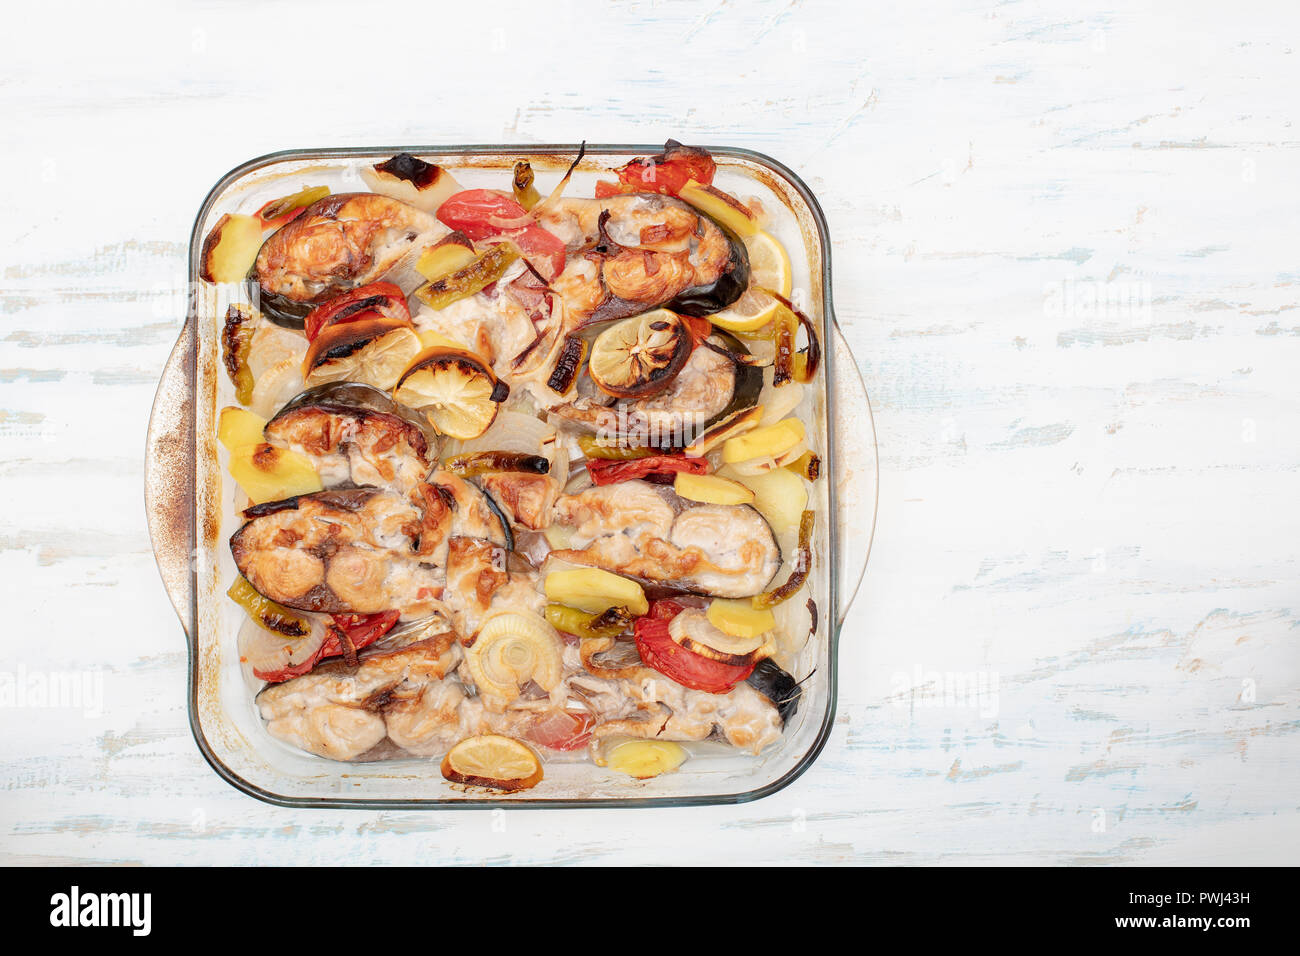 Tasty baked fish with onion, lemon, tomato and potato on glass plate on table close up Stock Photo